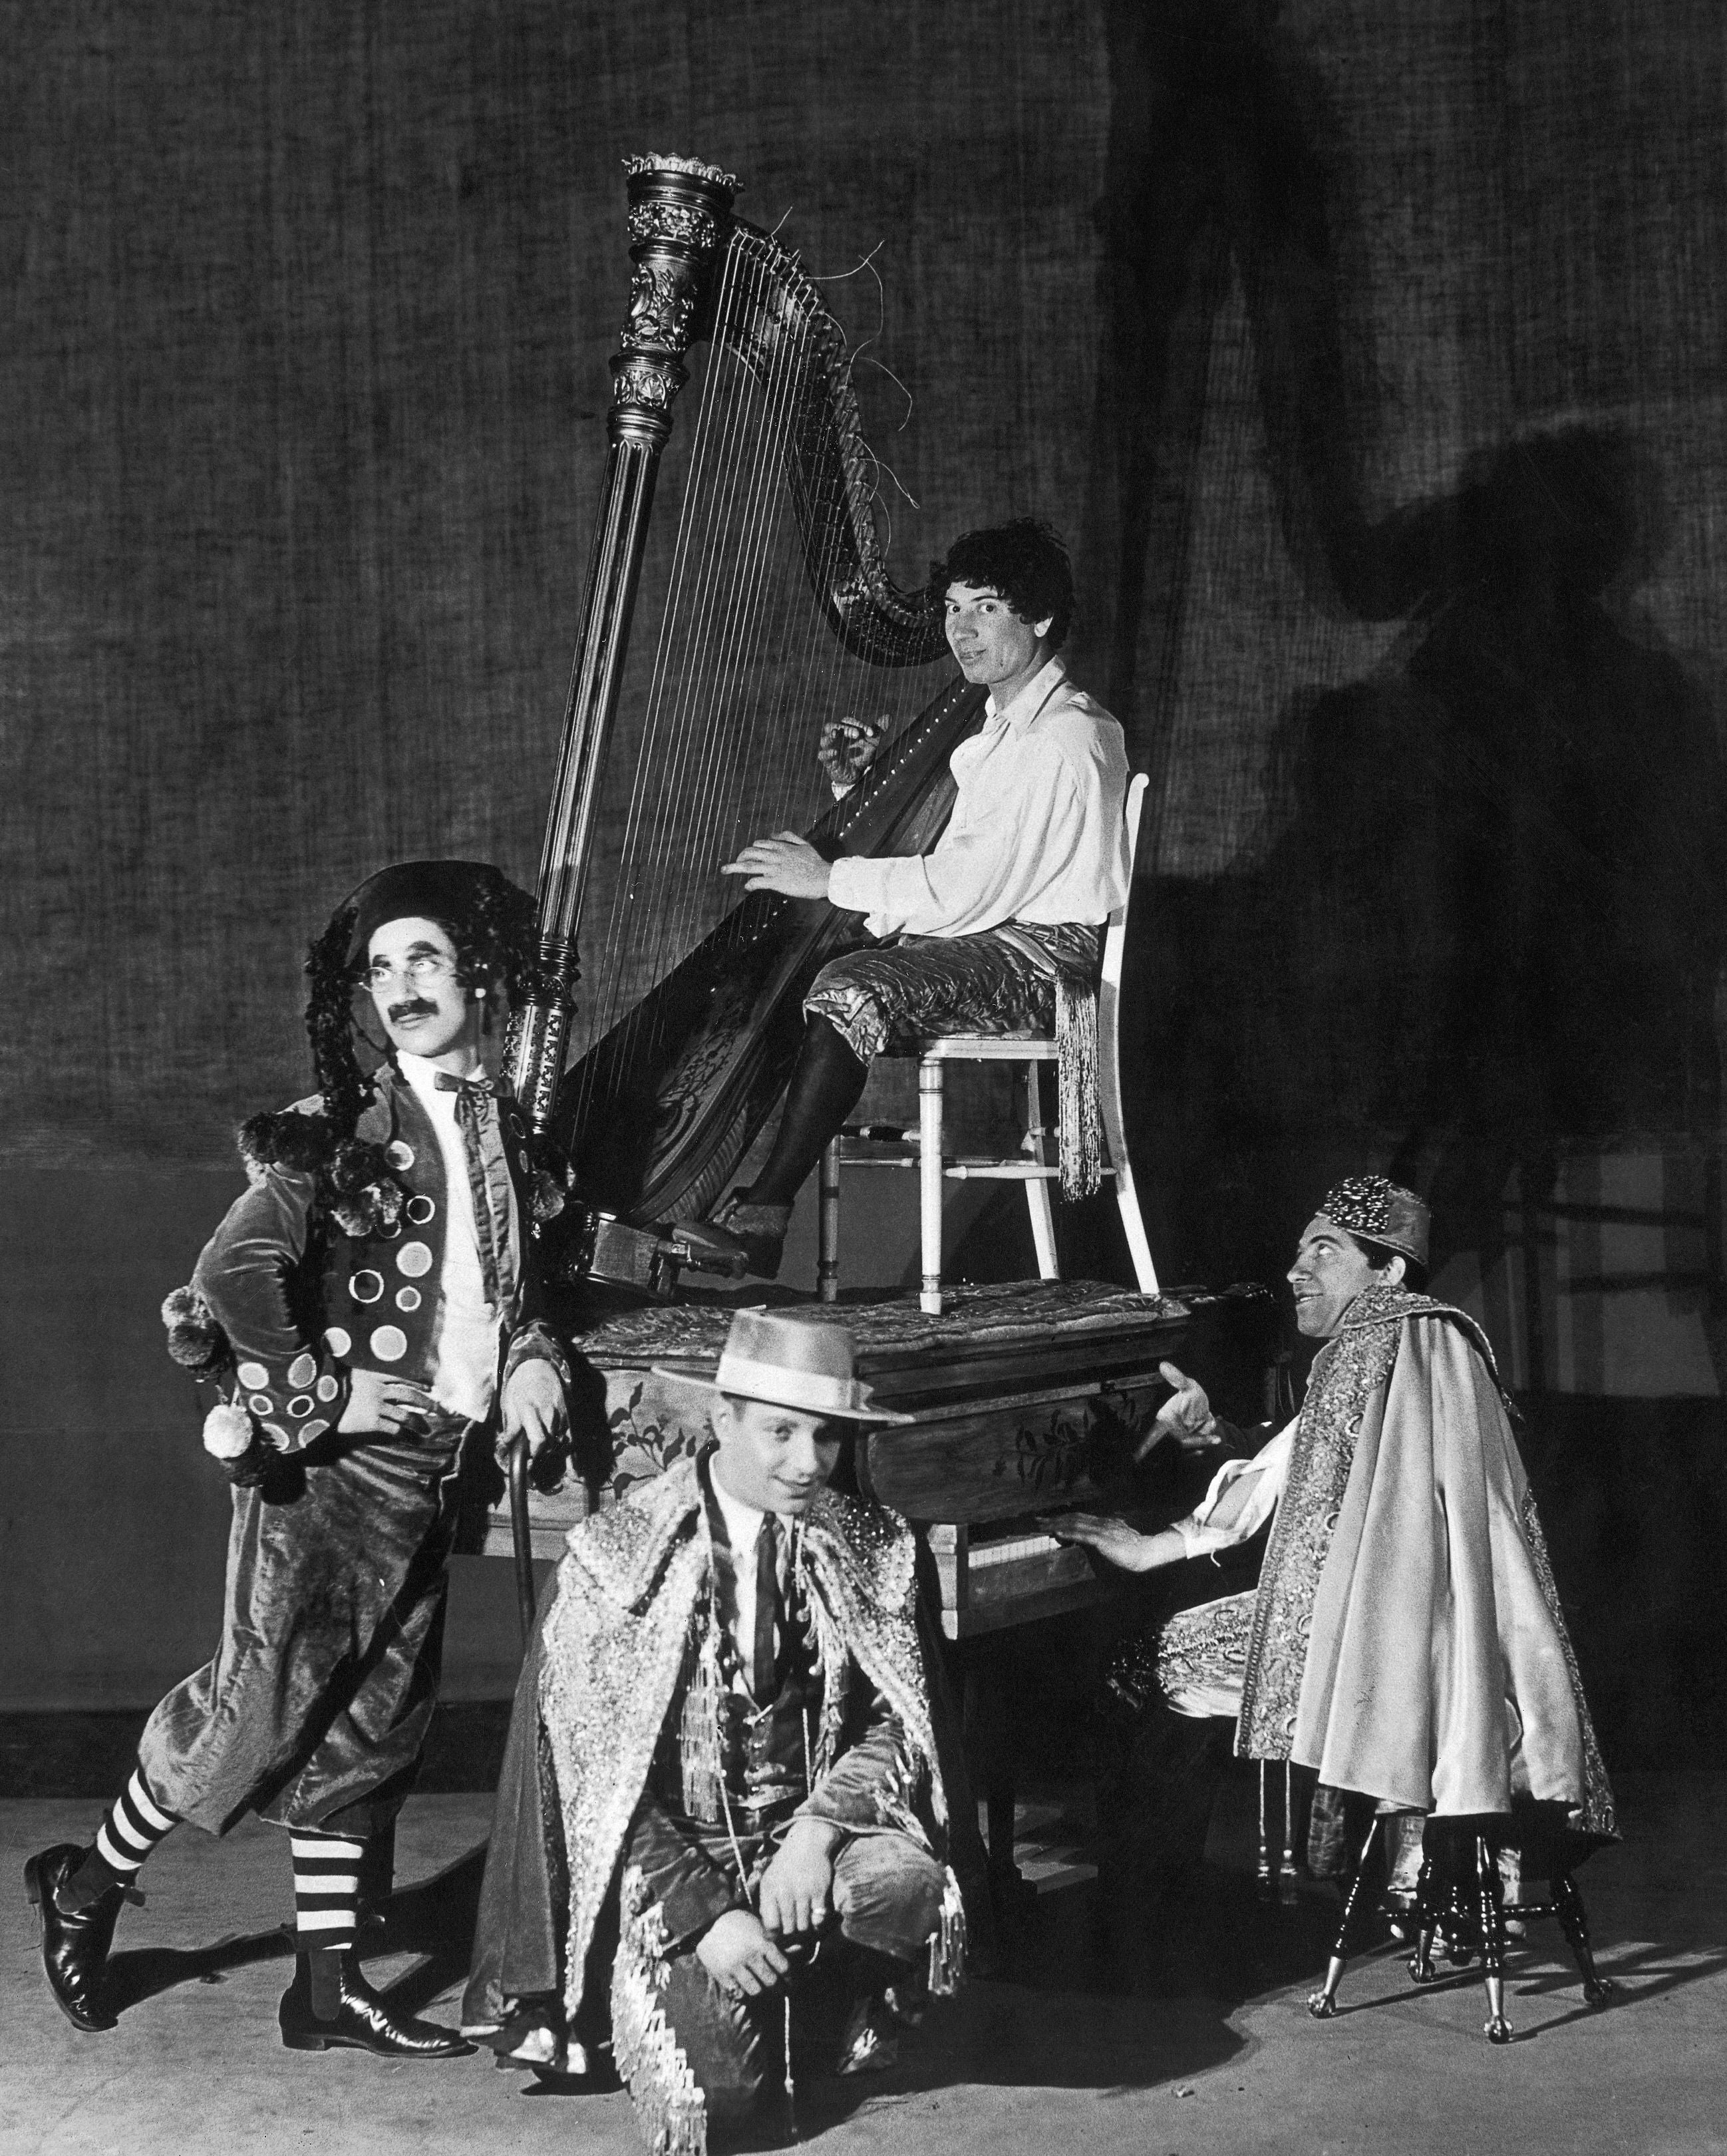 From left: Groucho, Zeppo, Chico and, with his harp, Harpo Marx